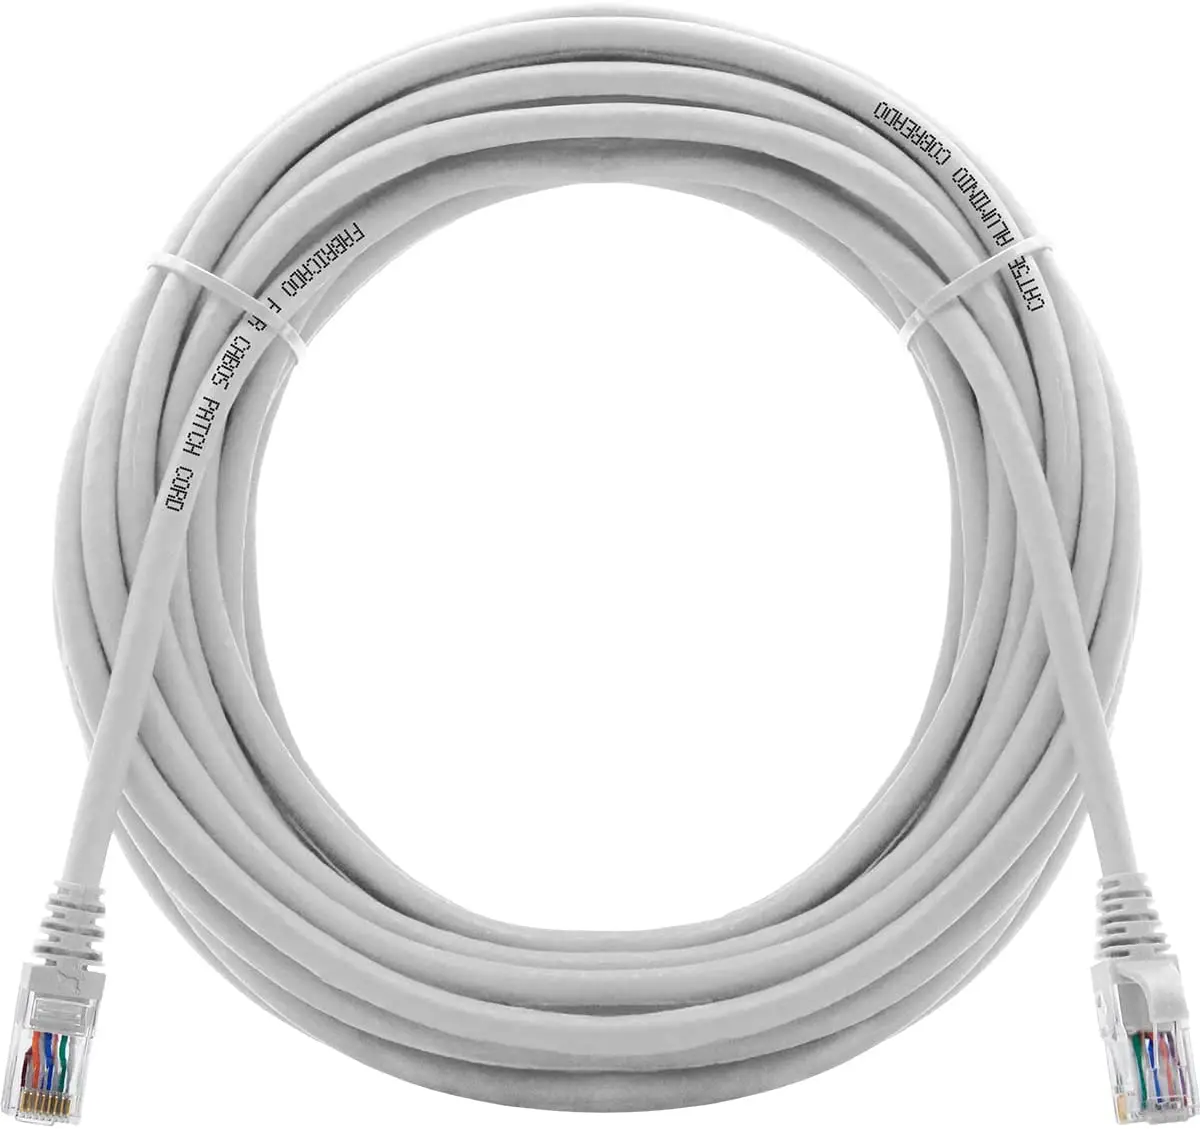 

Utp Cat5e Ethernet Cable 4 Pairs Lan Rj45 30 Meters White network cable